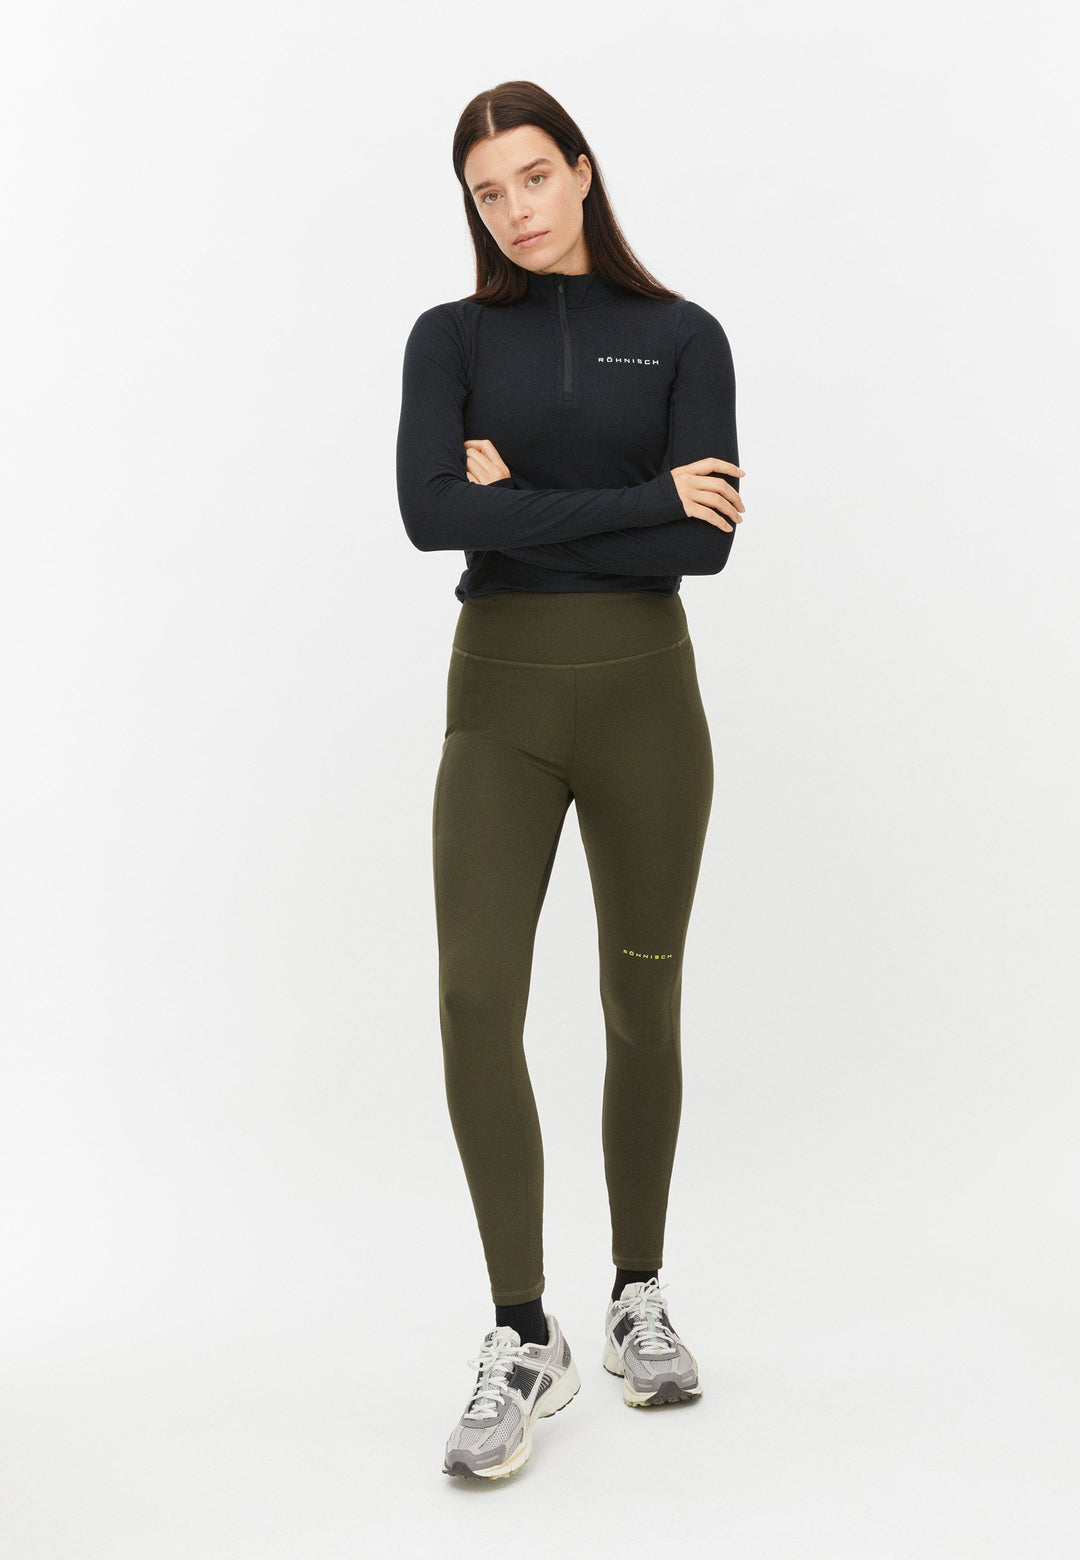 Thermal Tights Forest Brown